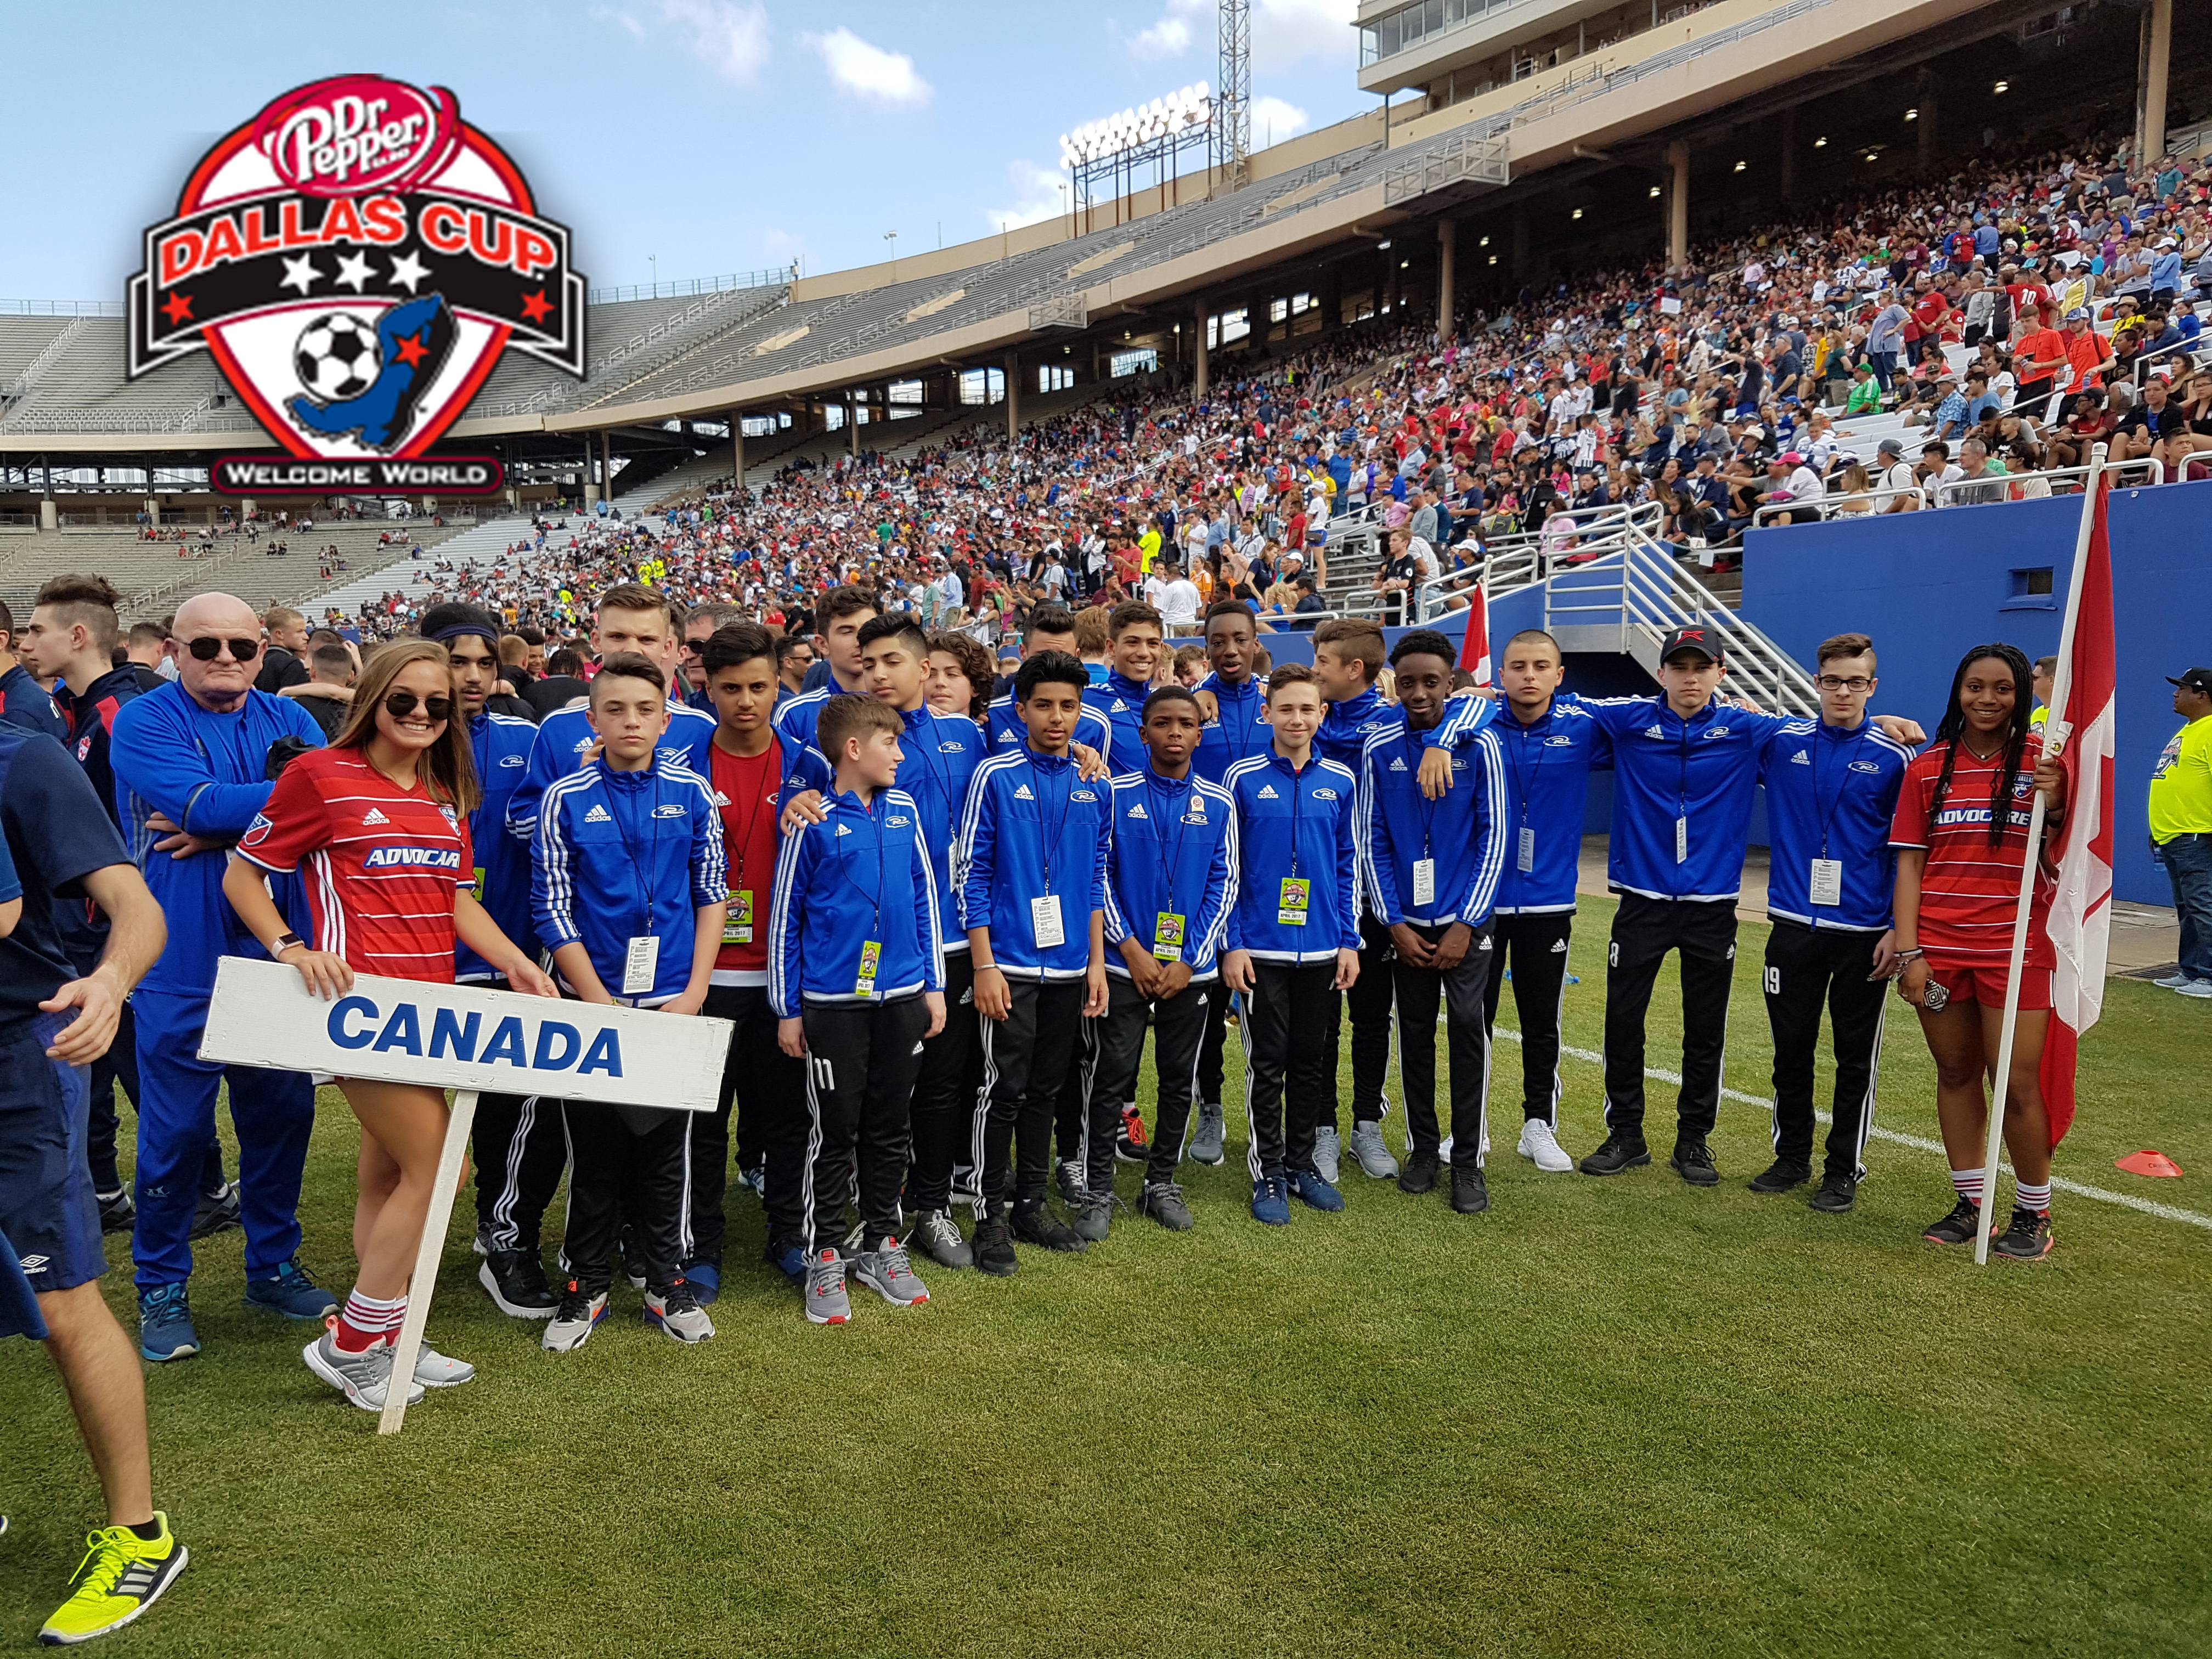 Rush Canada Advances to Dallas Cup SemiFinal Soccer Academy in